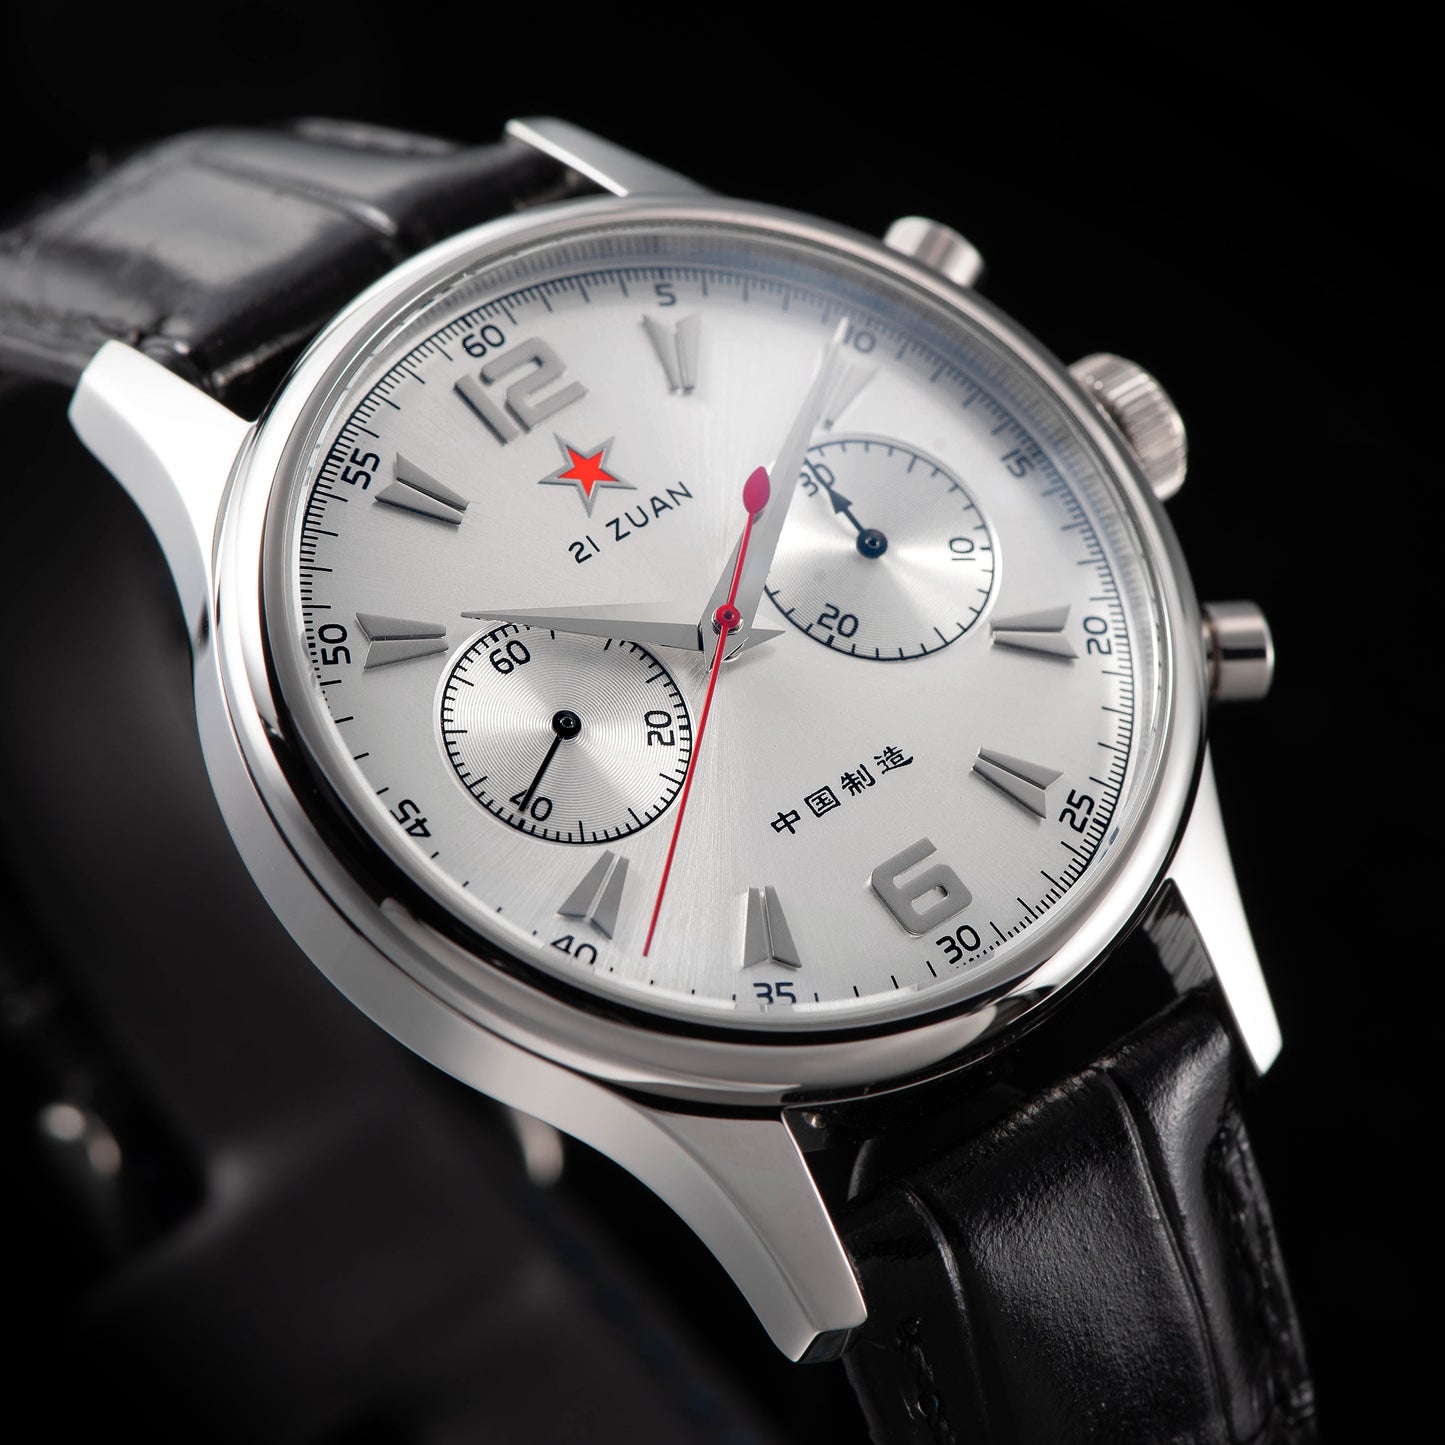 Seagull Movement Watch SU1963S 1963 38mm Silver Dial